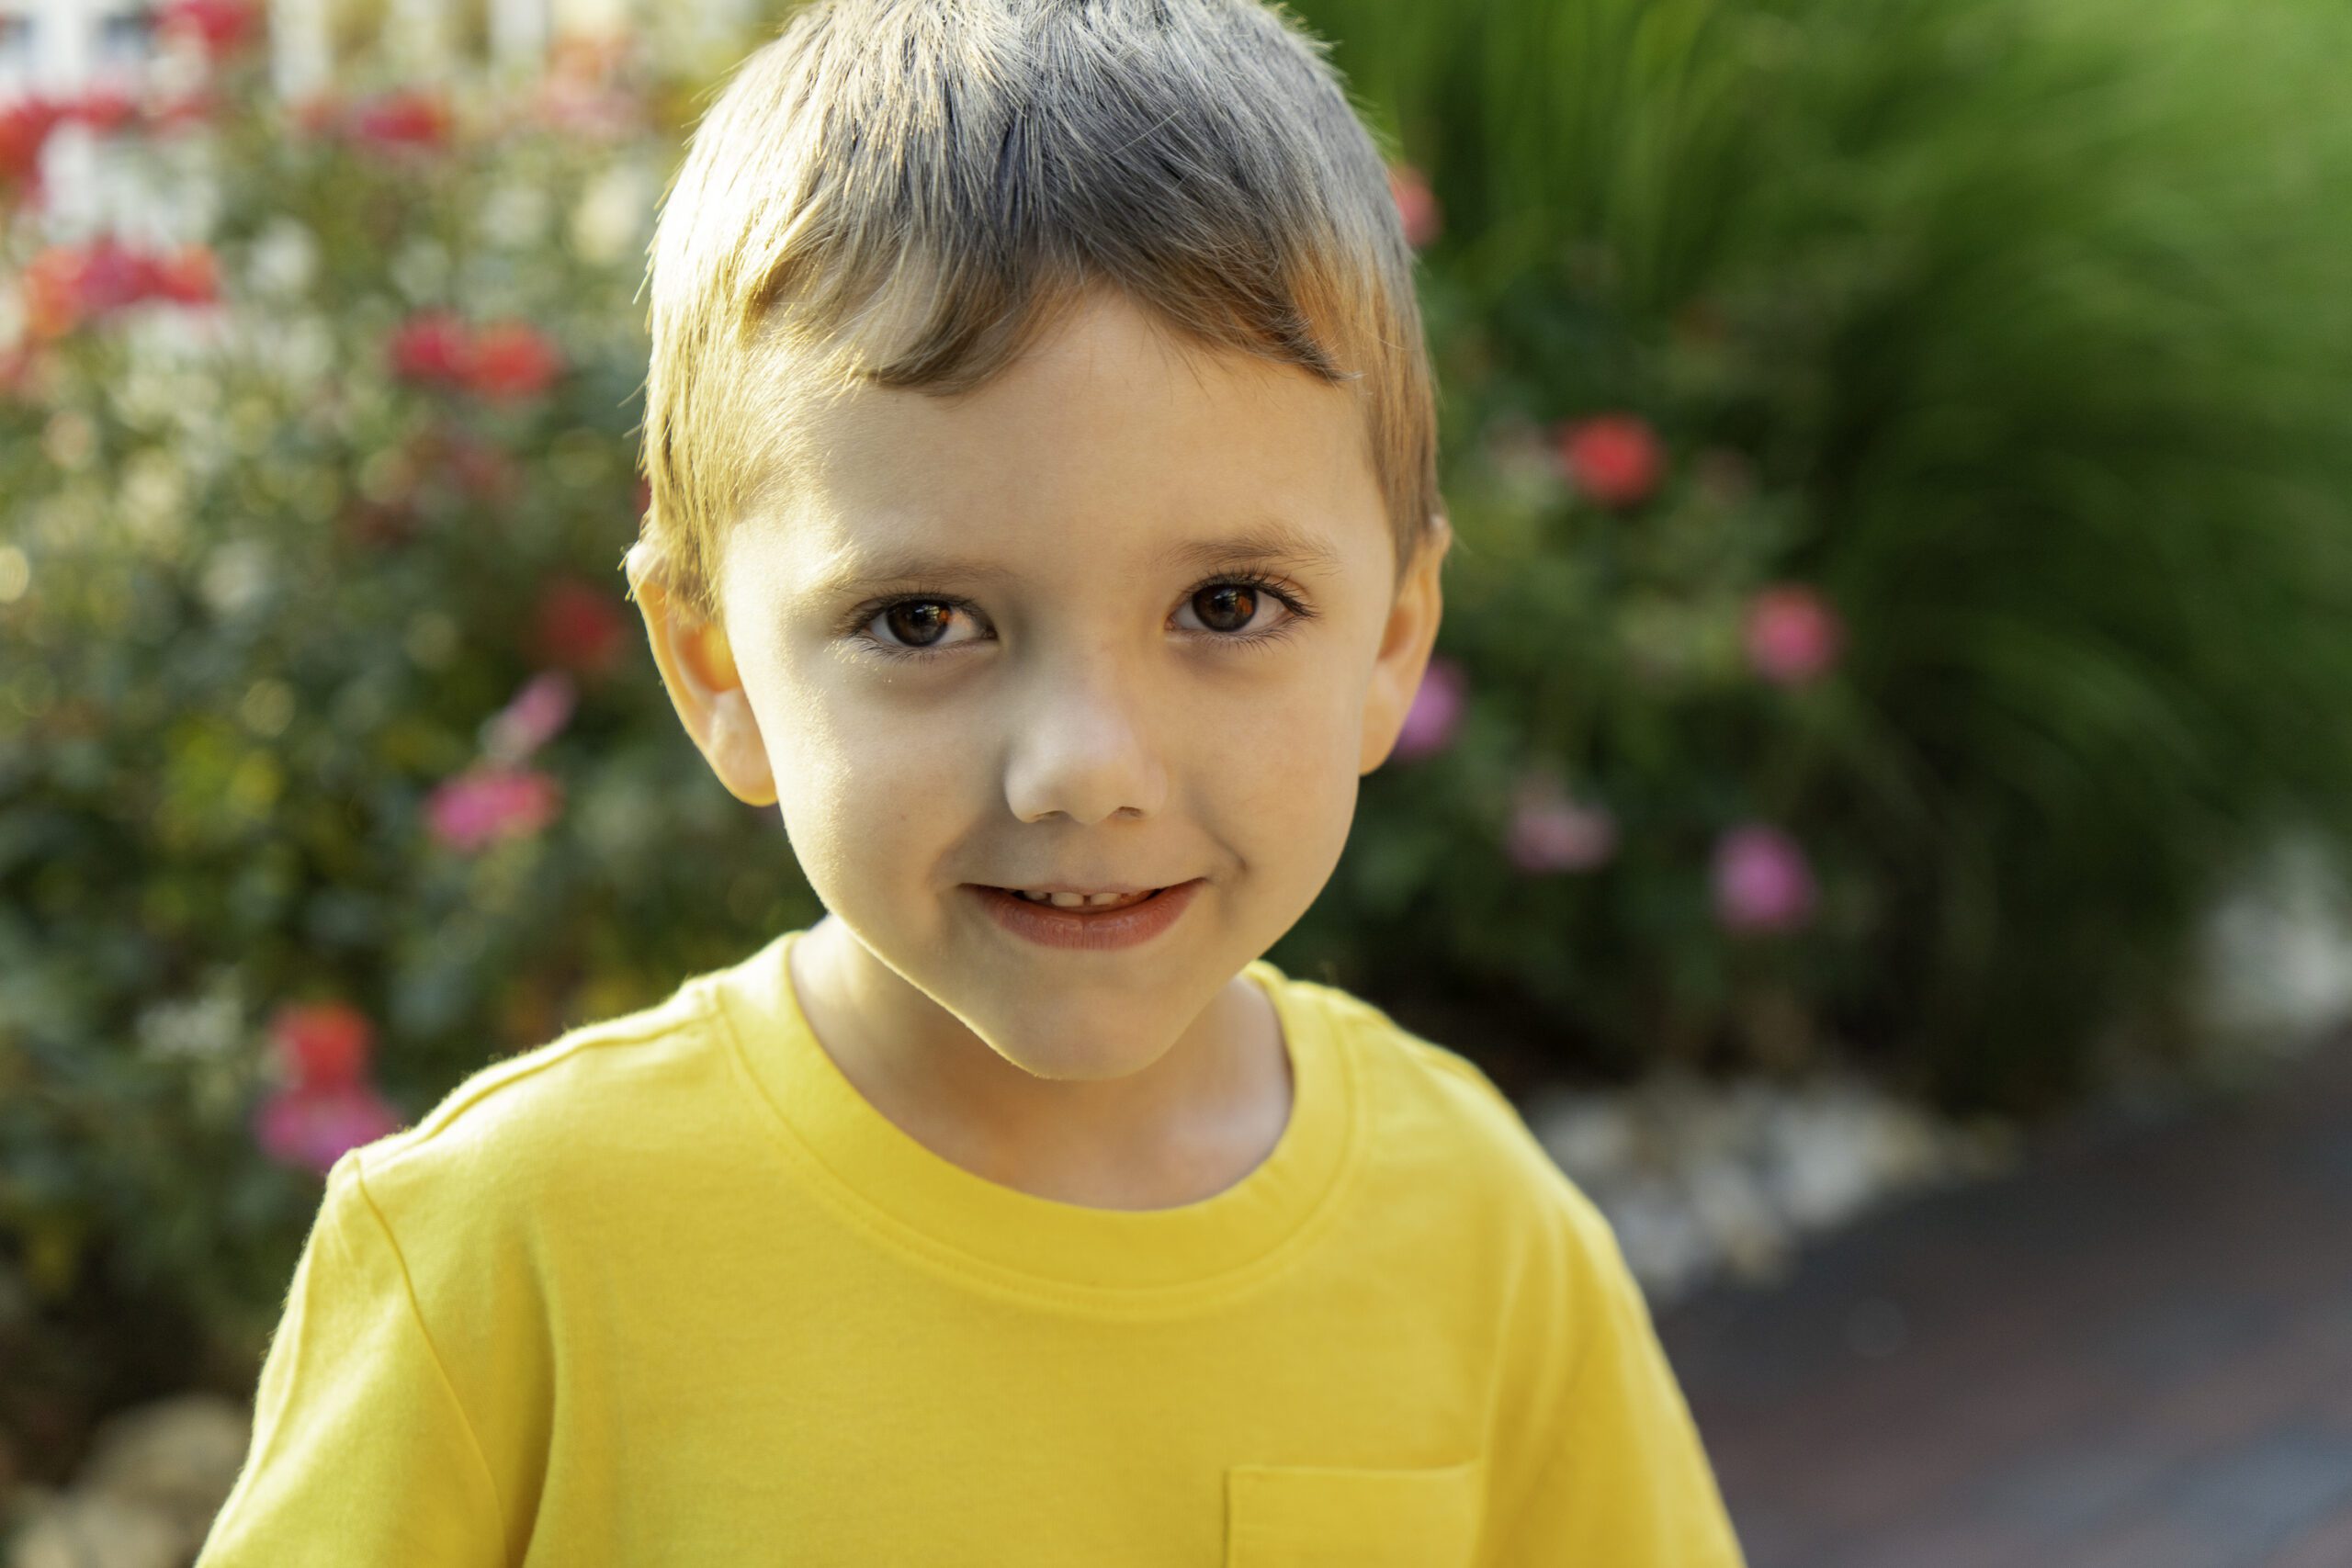 a young boy with grey hair and yellow shirt